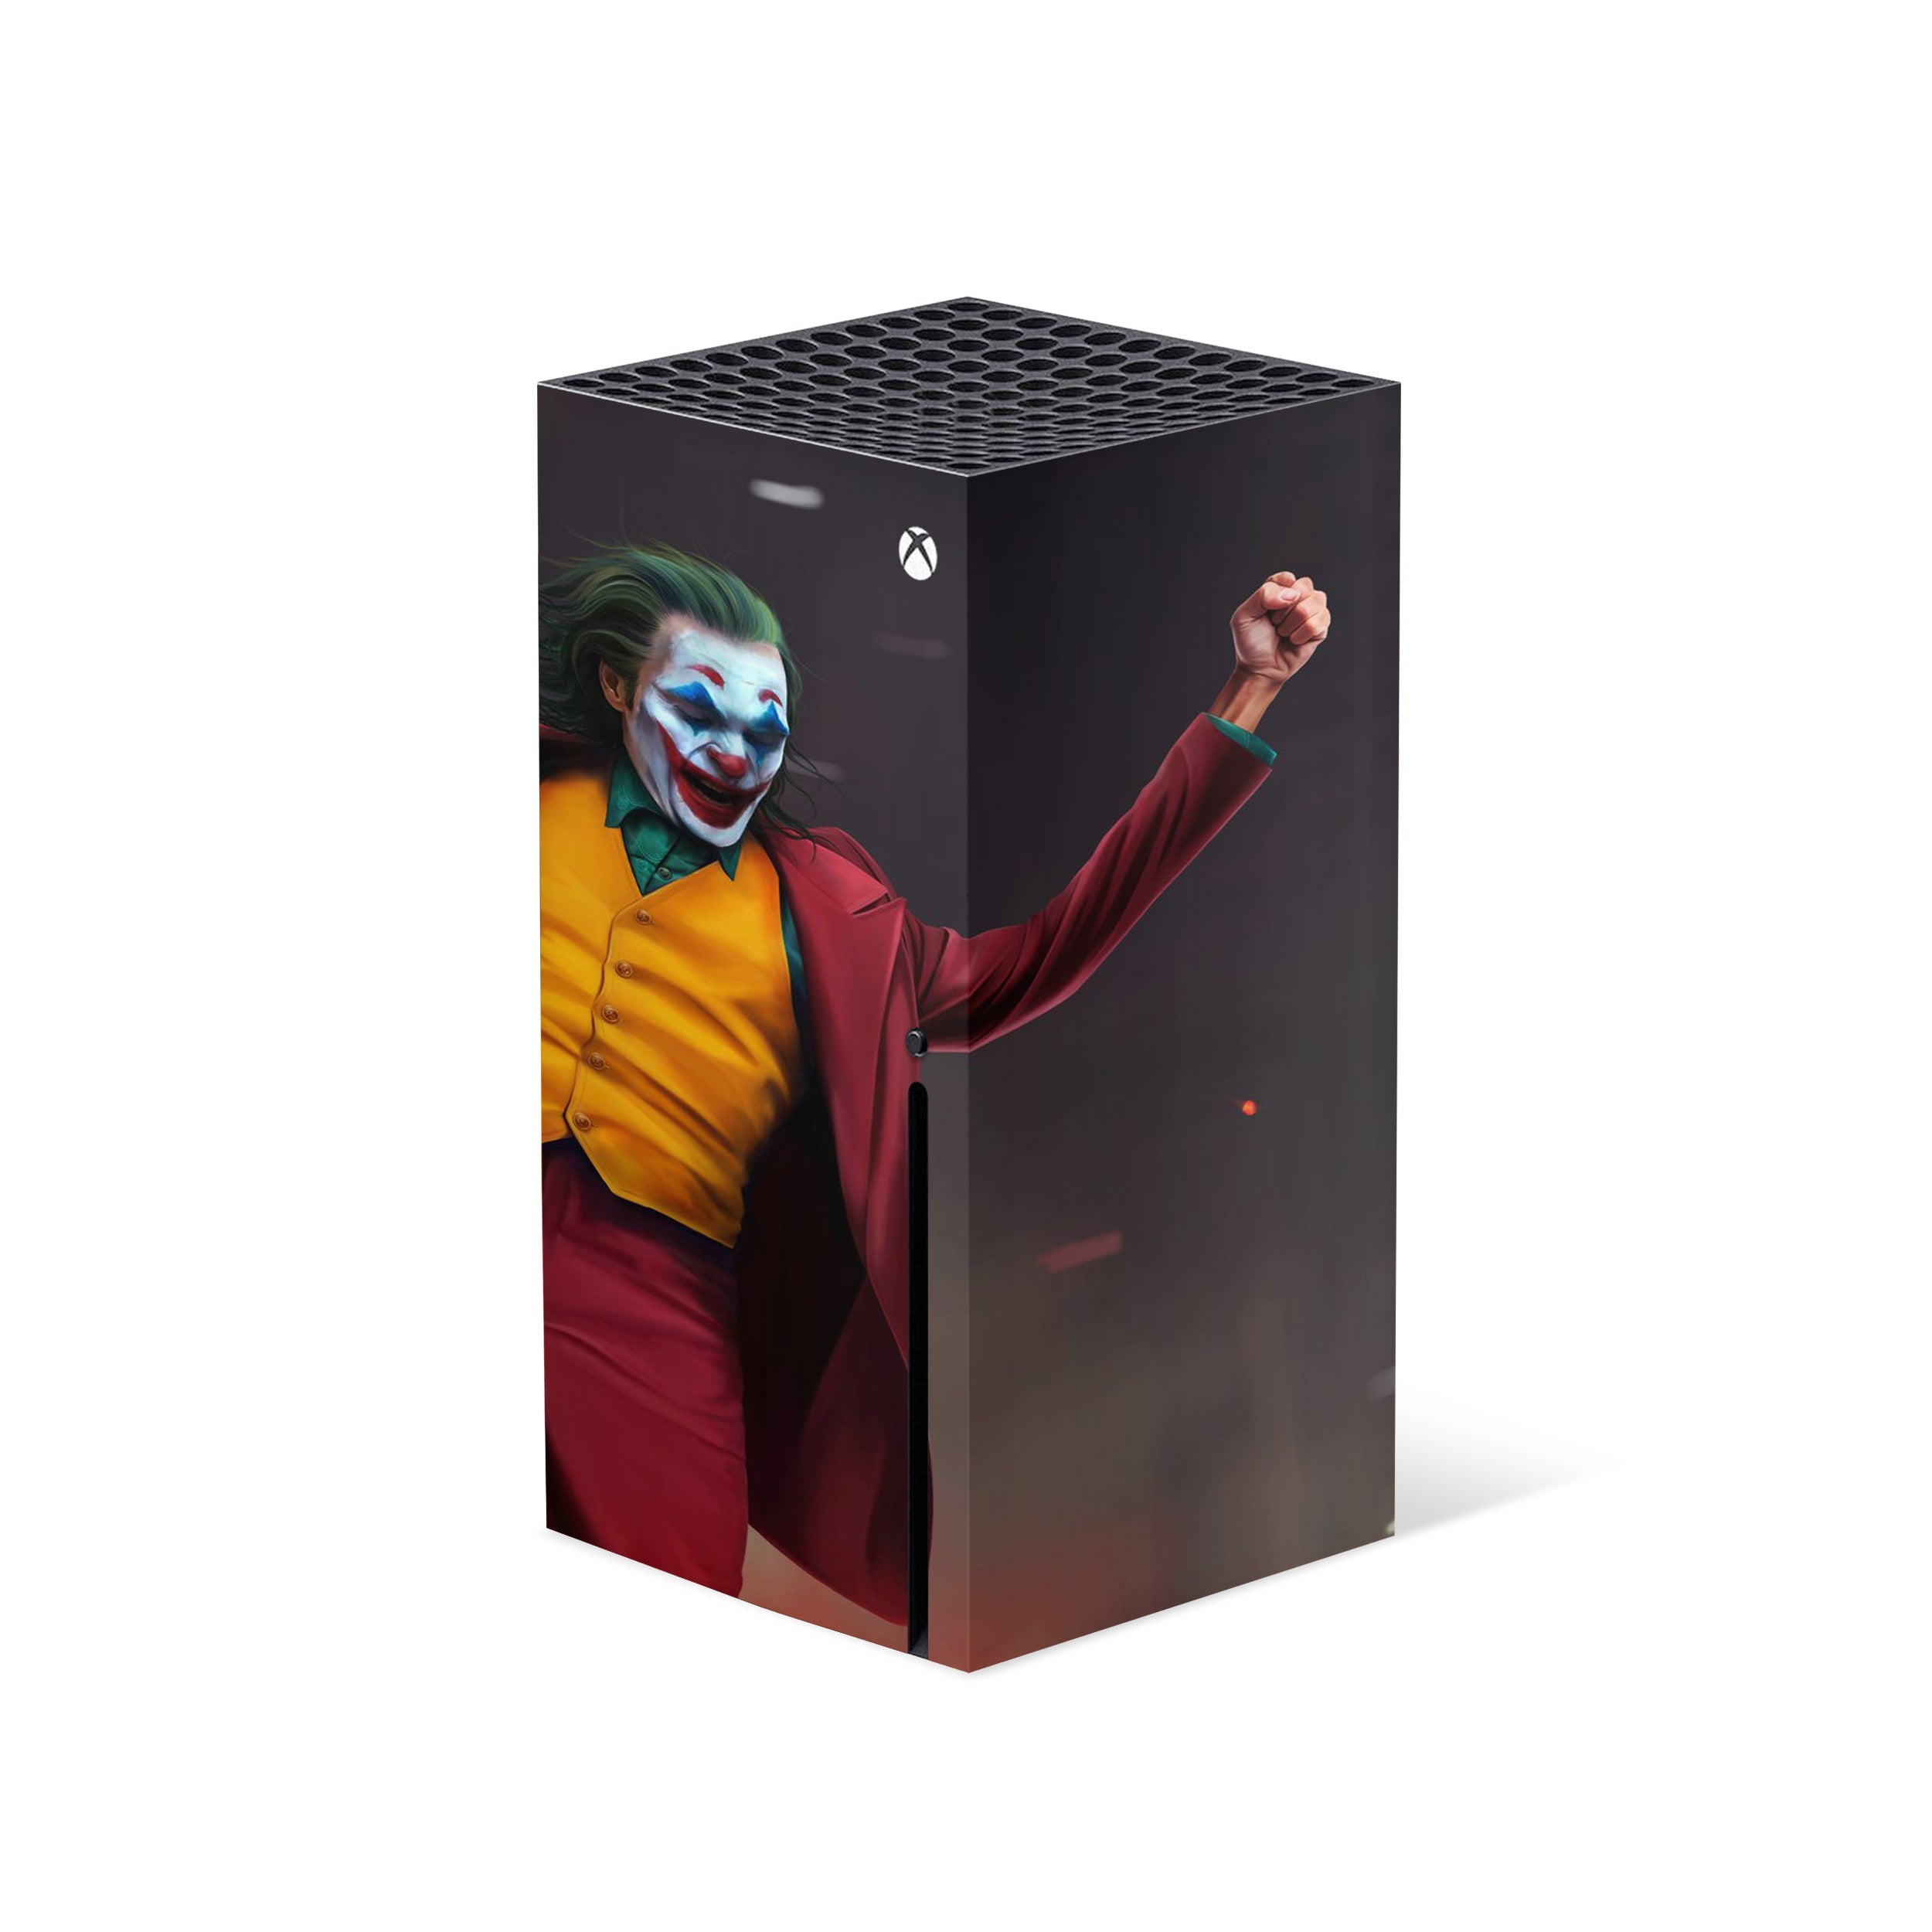 A video game skin featuring a DC Comics Joker design for the Xbox Series X.